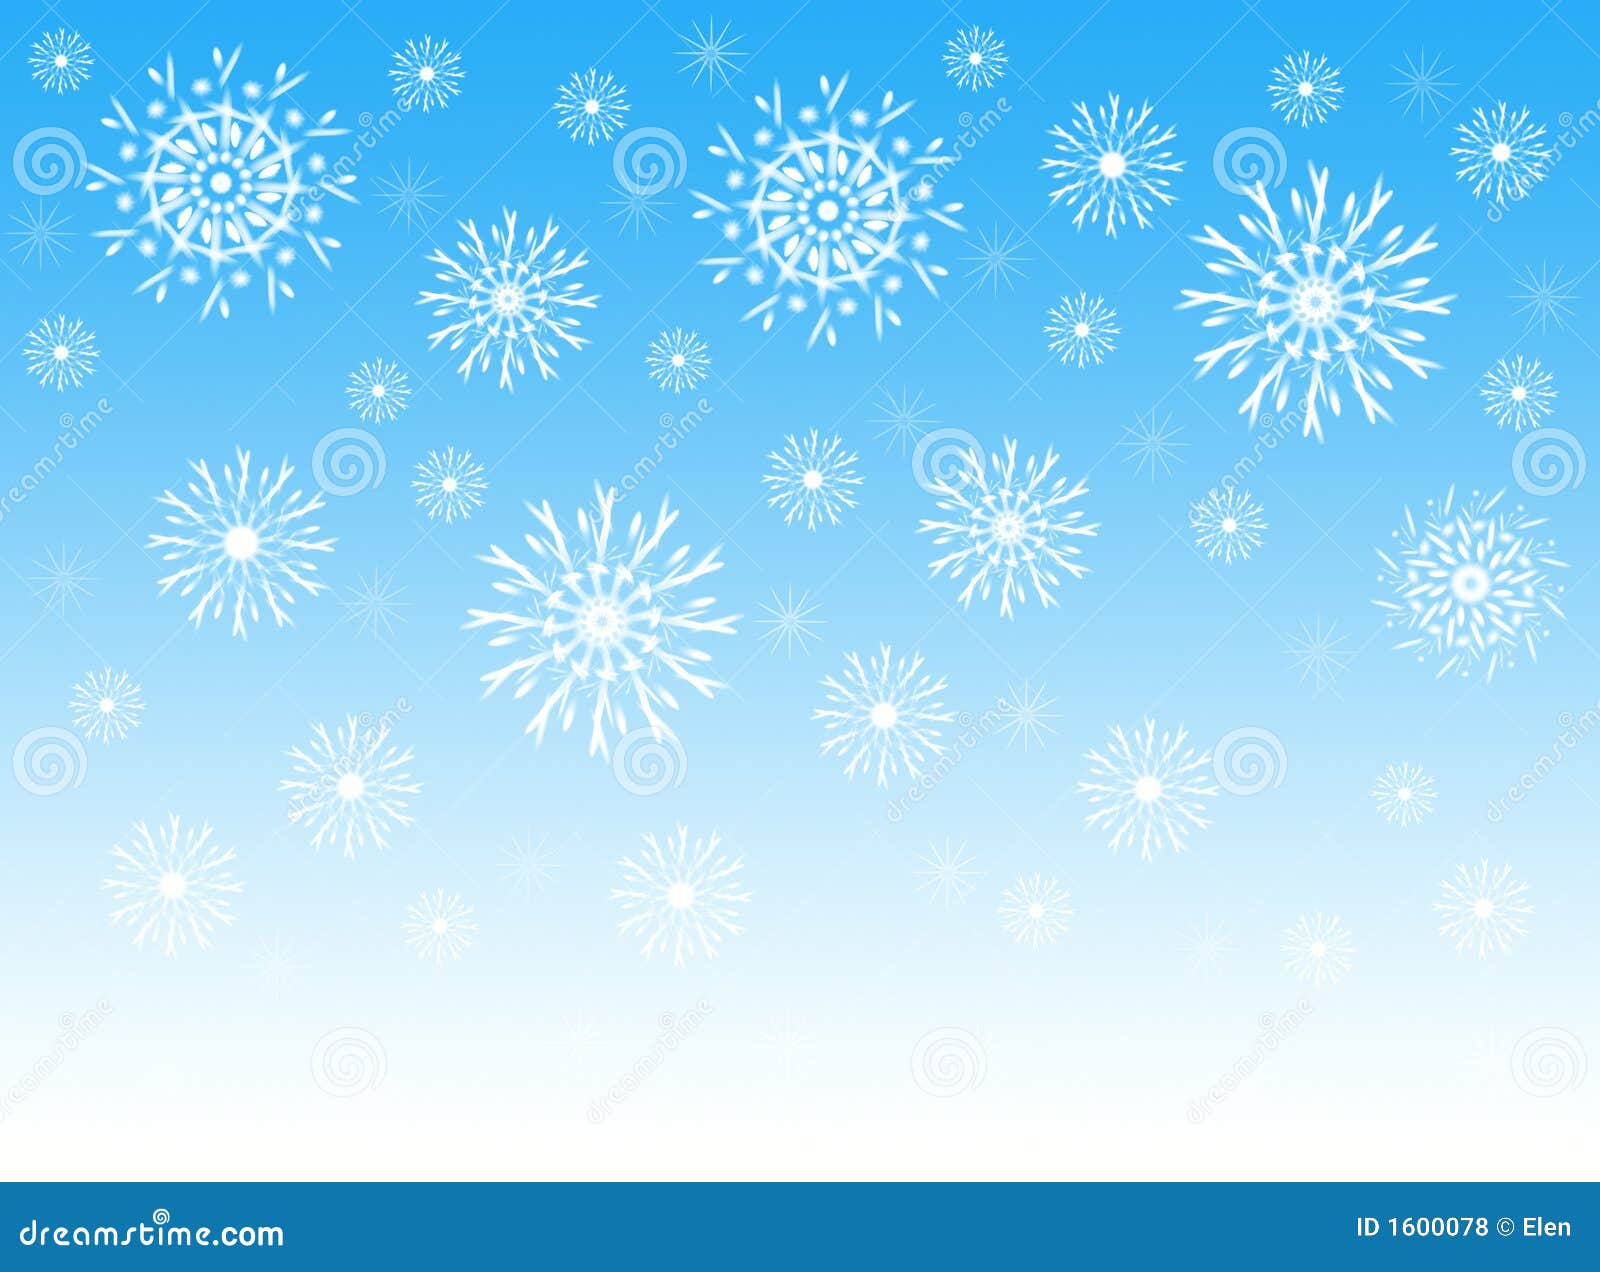 Sky And Snowflakes Royalty Free Stock Photos - Image: 1600078